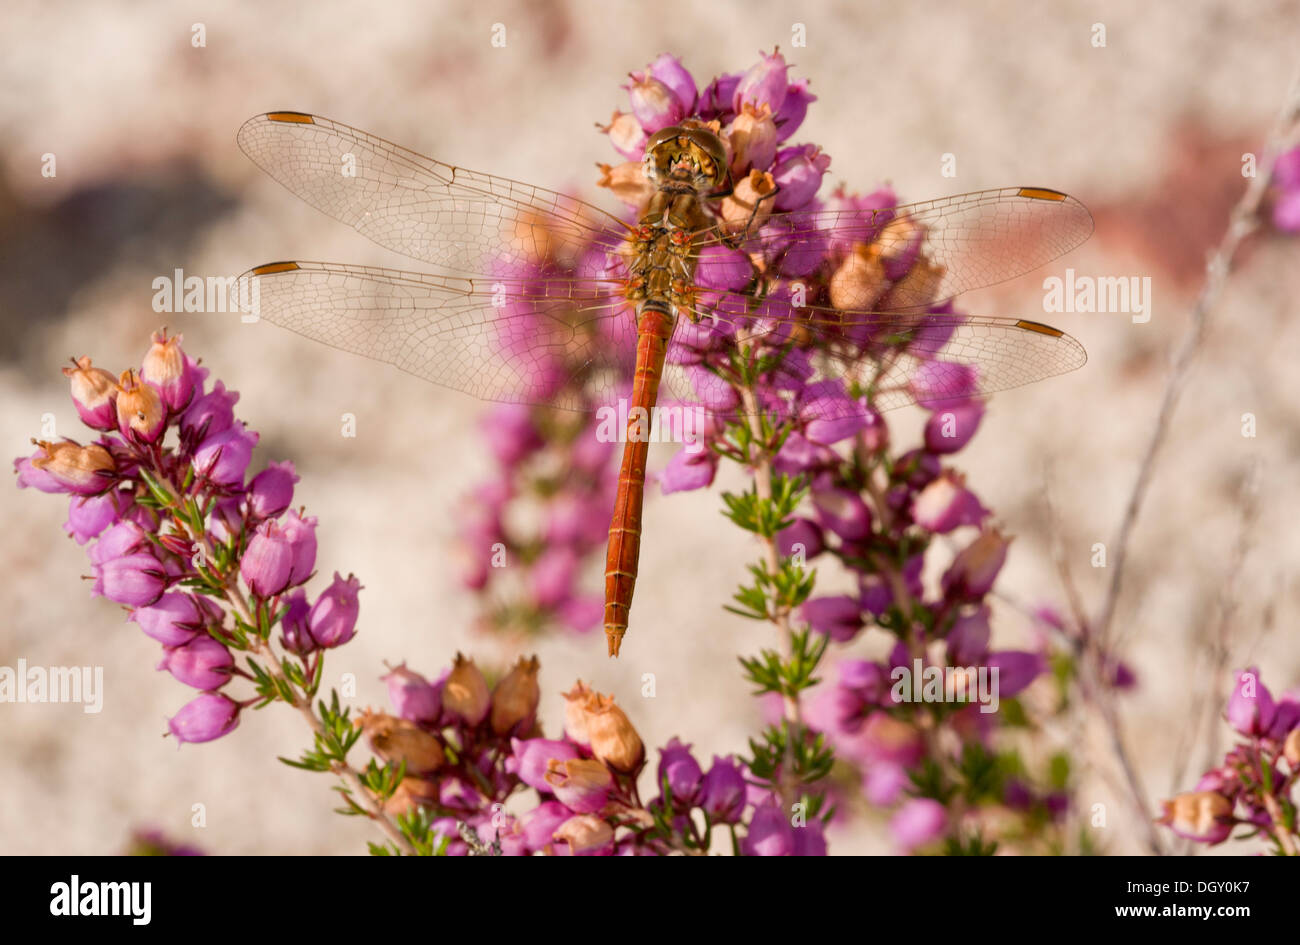 Male Moustached Darter / Vagrant Darter, Sympetrum vulgatum. Dragonfly perched on Bell Heather. France. Stock Photo